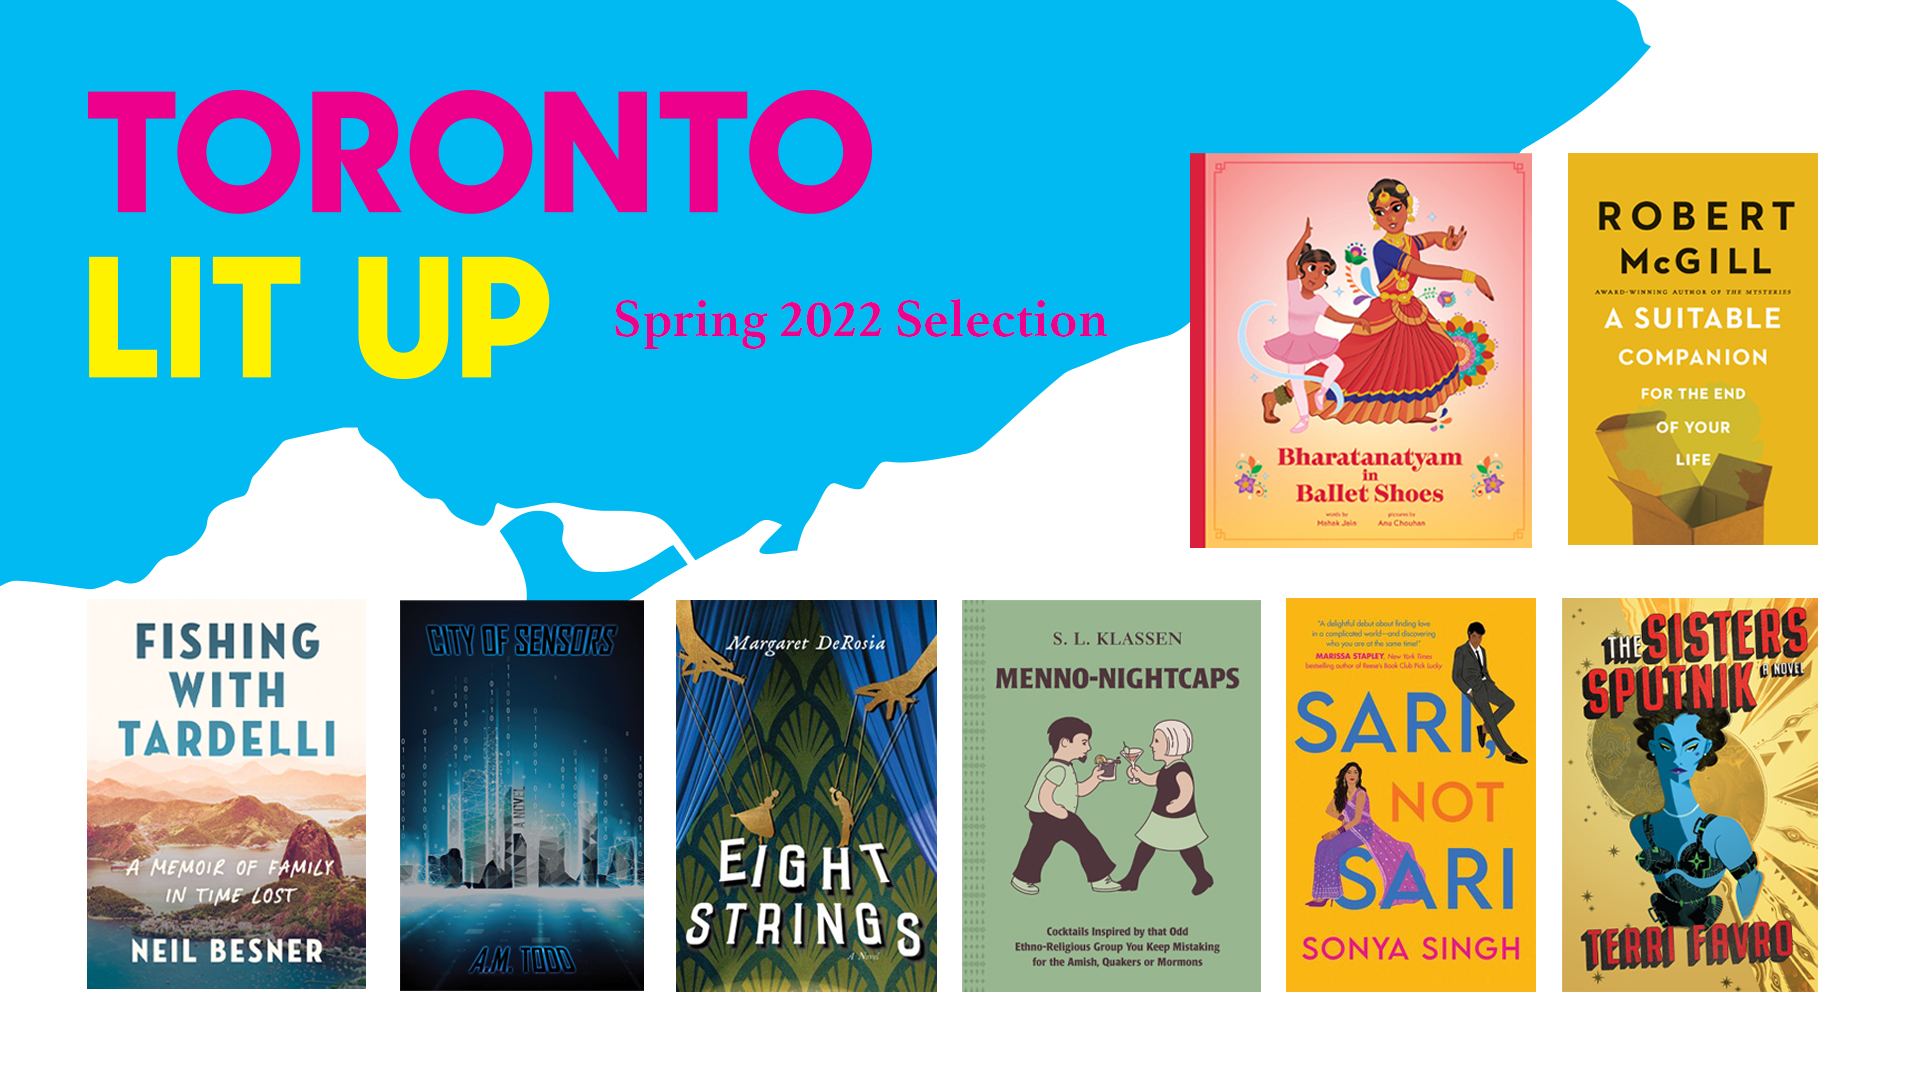 Toronto Lit Up banner with "Spring 2022 Selection" and the featured book titles displayed.